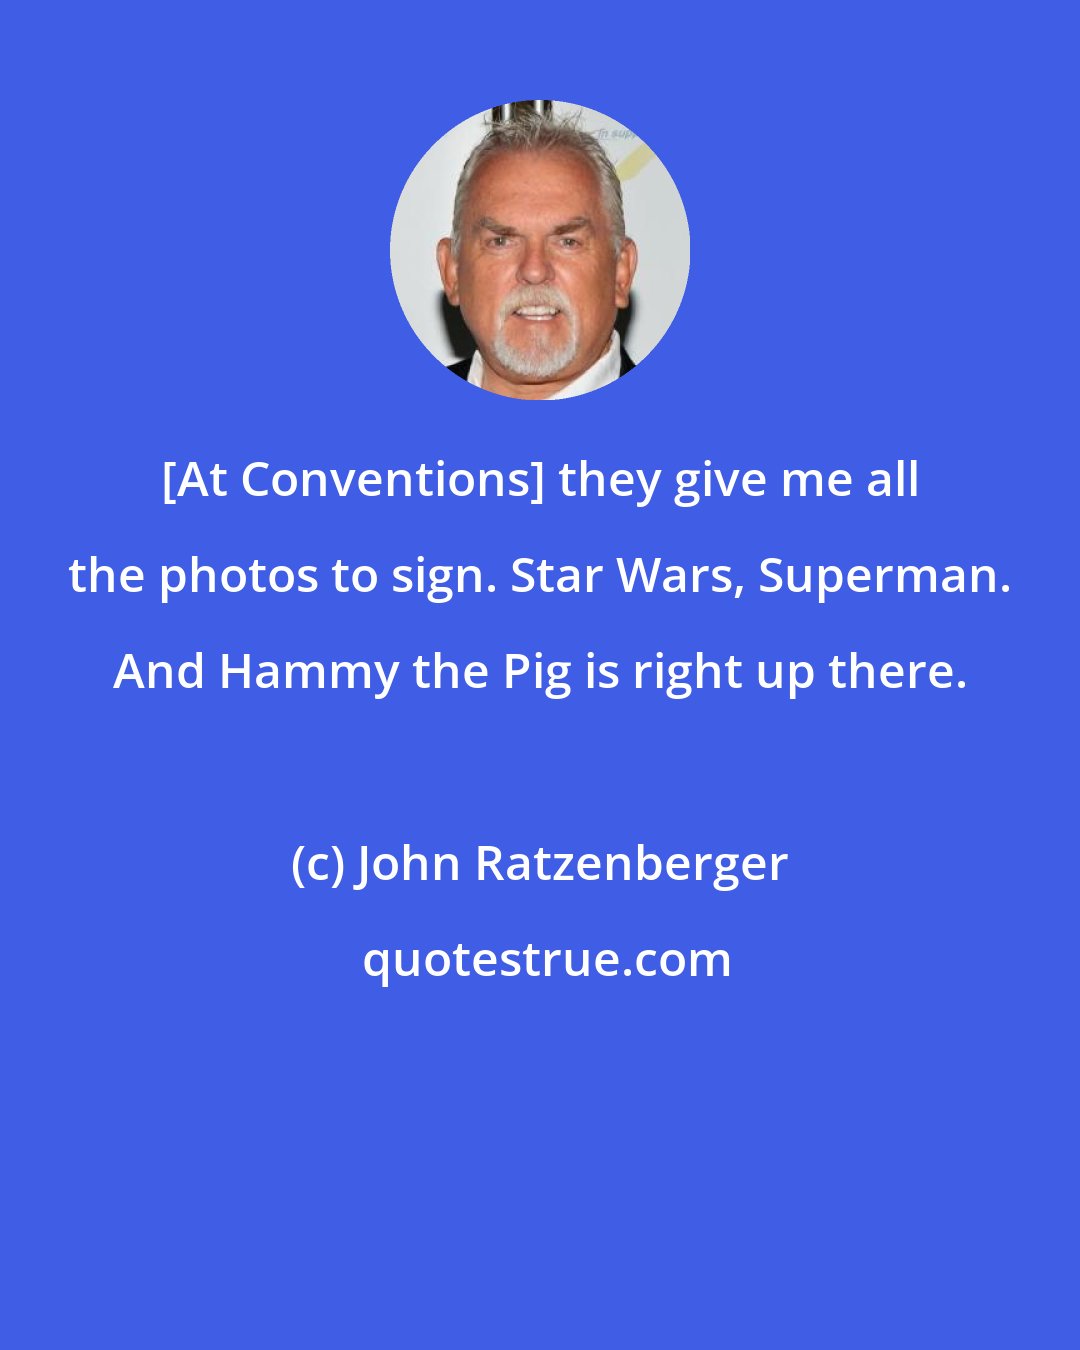 John Ratzenberger: [At Conventions] they give me all the photos to sign. Star Wars, Superman. And Hammy the Pig is right up there.